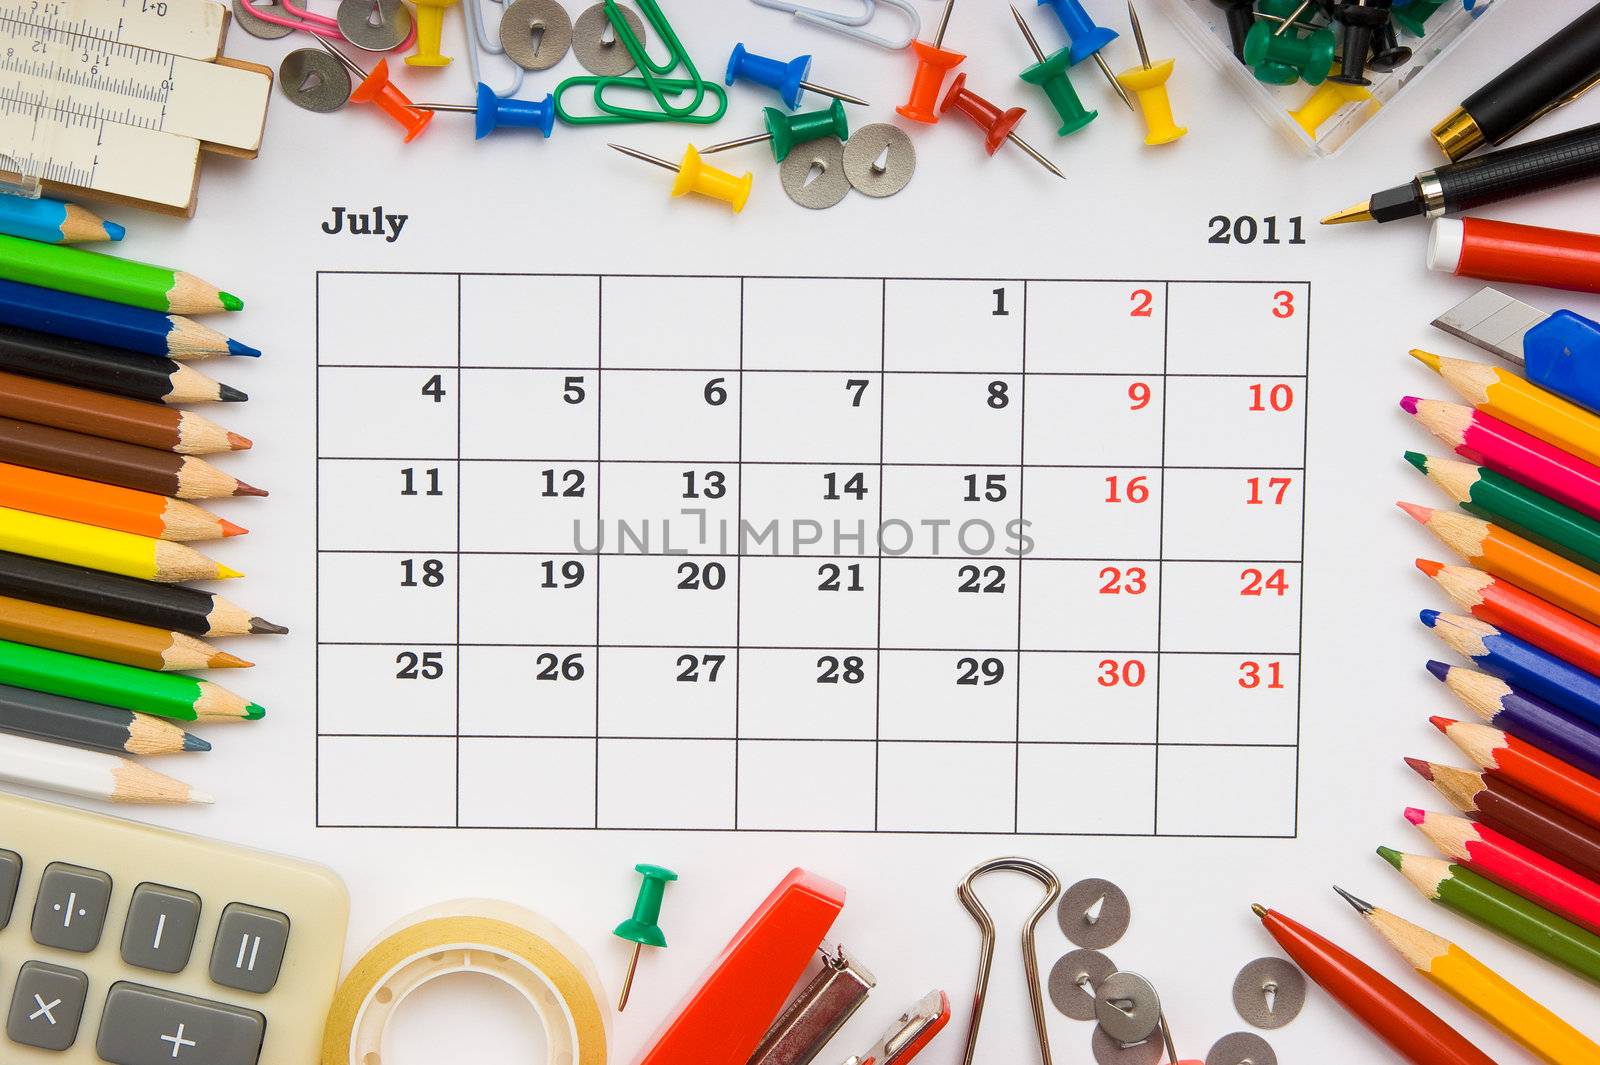 monthly calendar with the office, school and office supplies for 2011